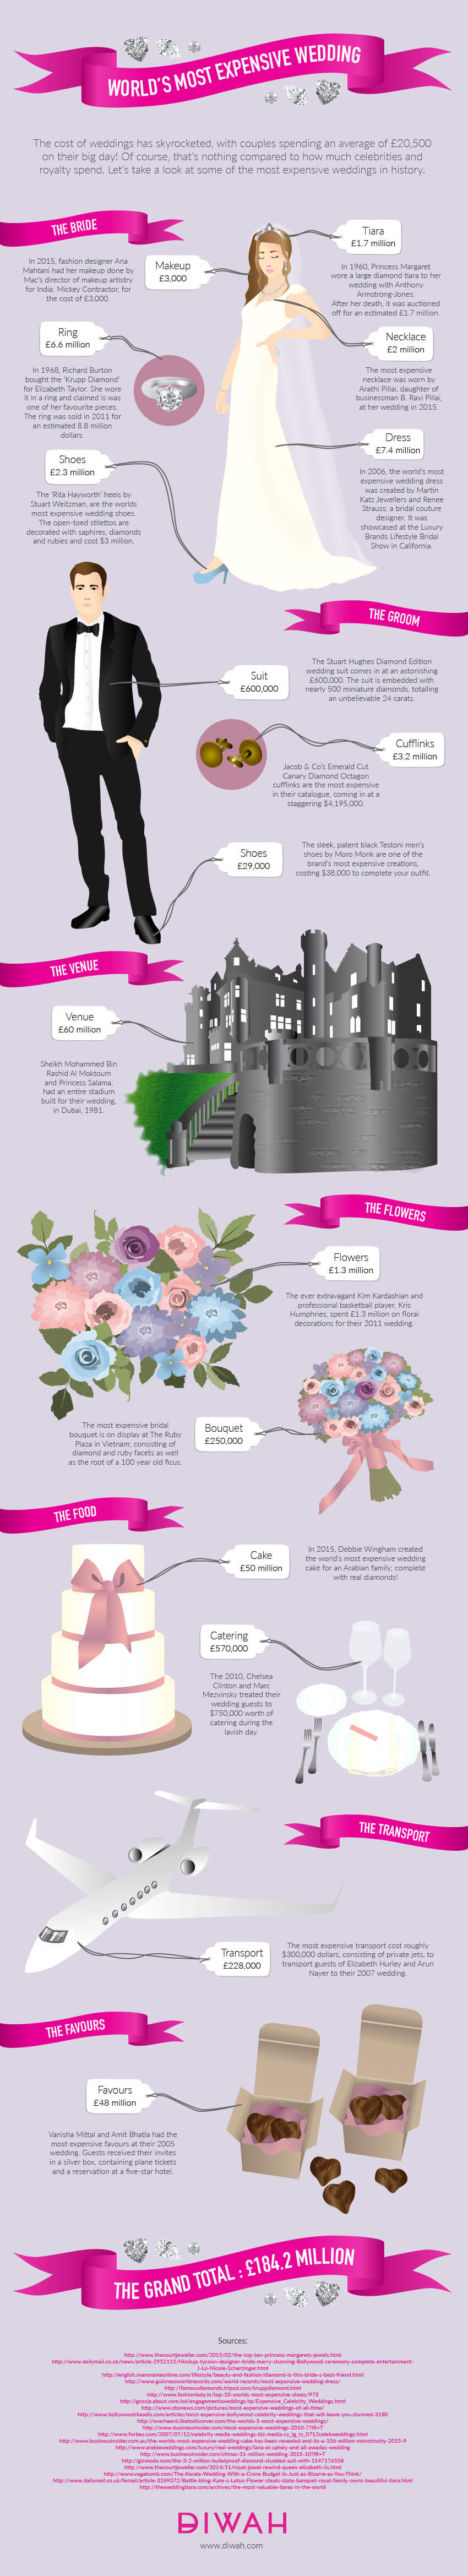 The Anatomy of History’s Most Expensive Wedding